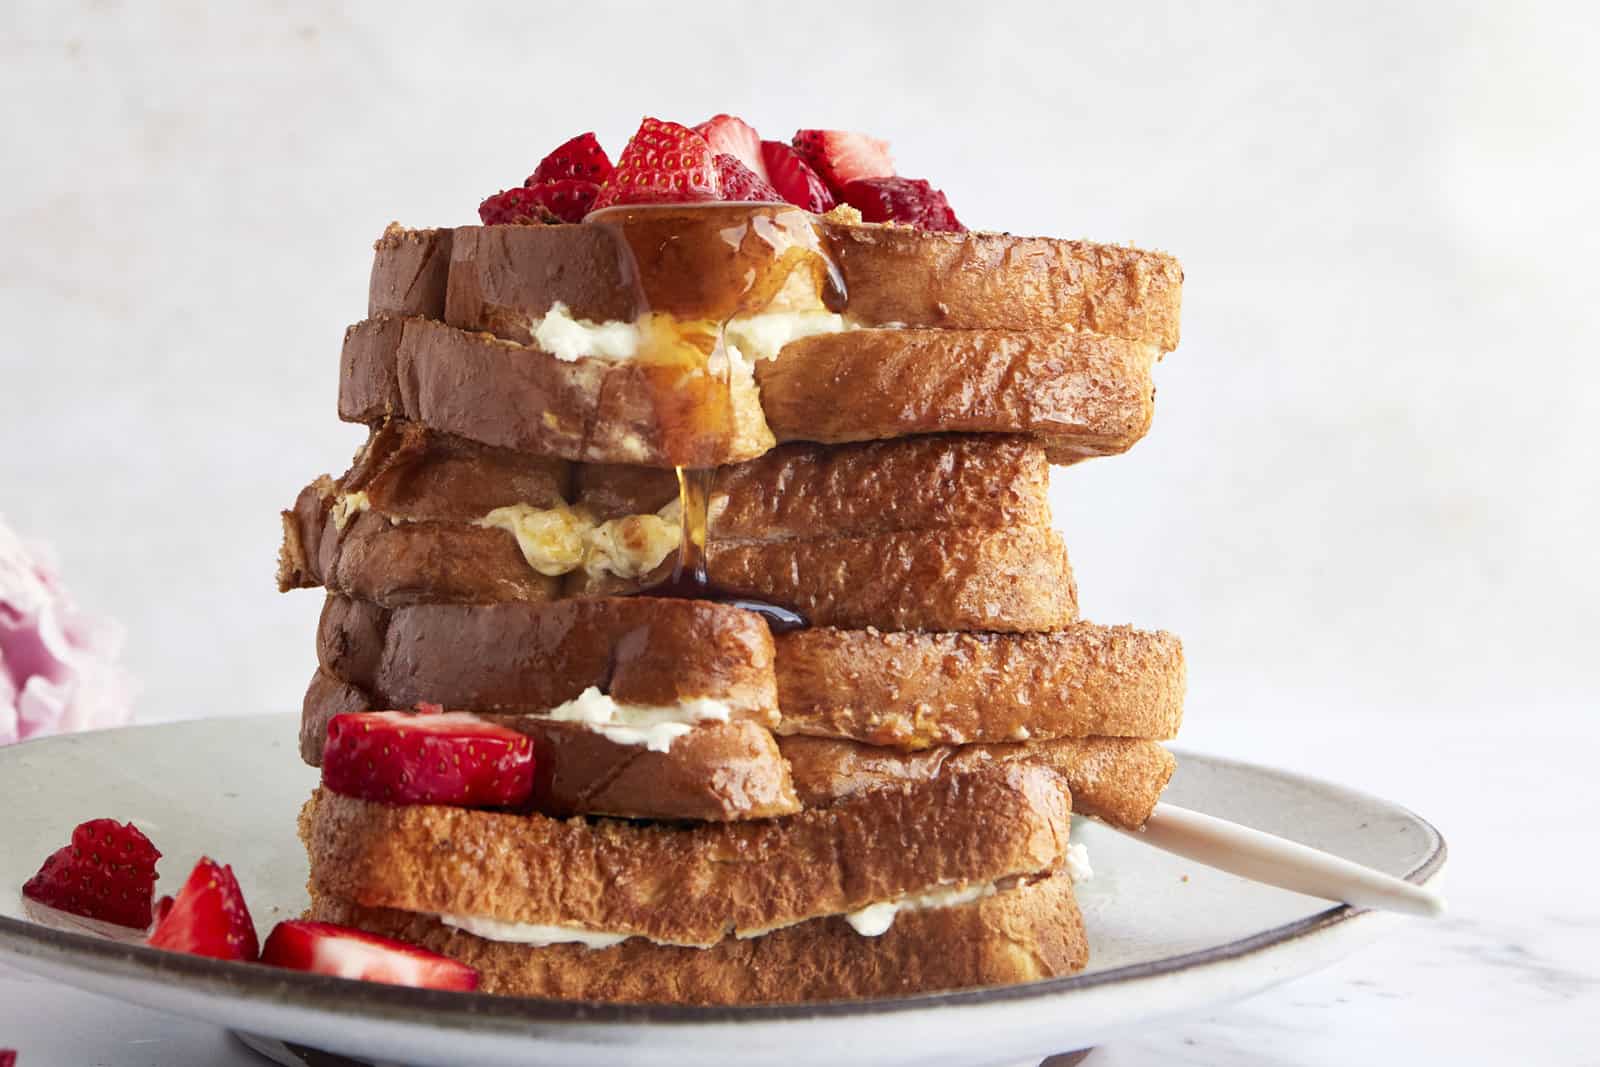 Air fryer french toast sandwiches on a plate topped with berries.